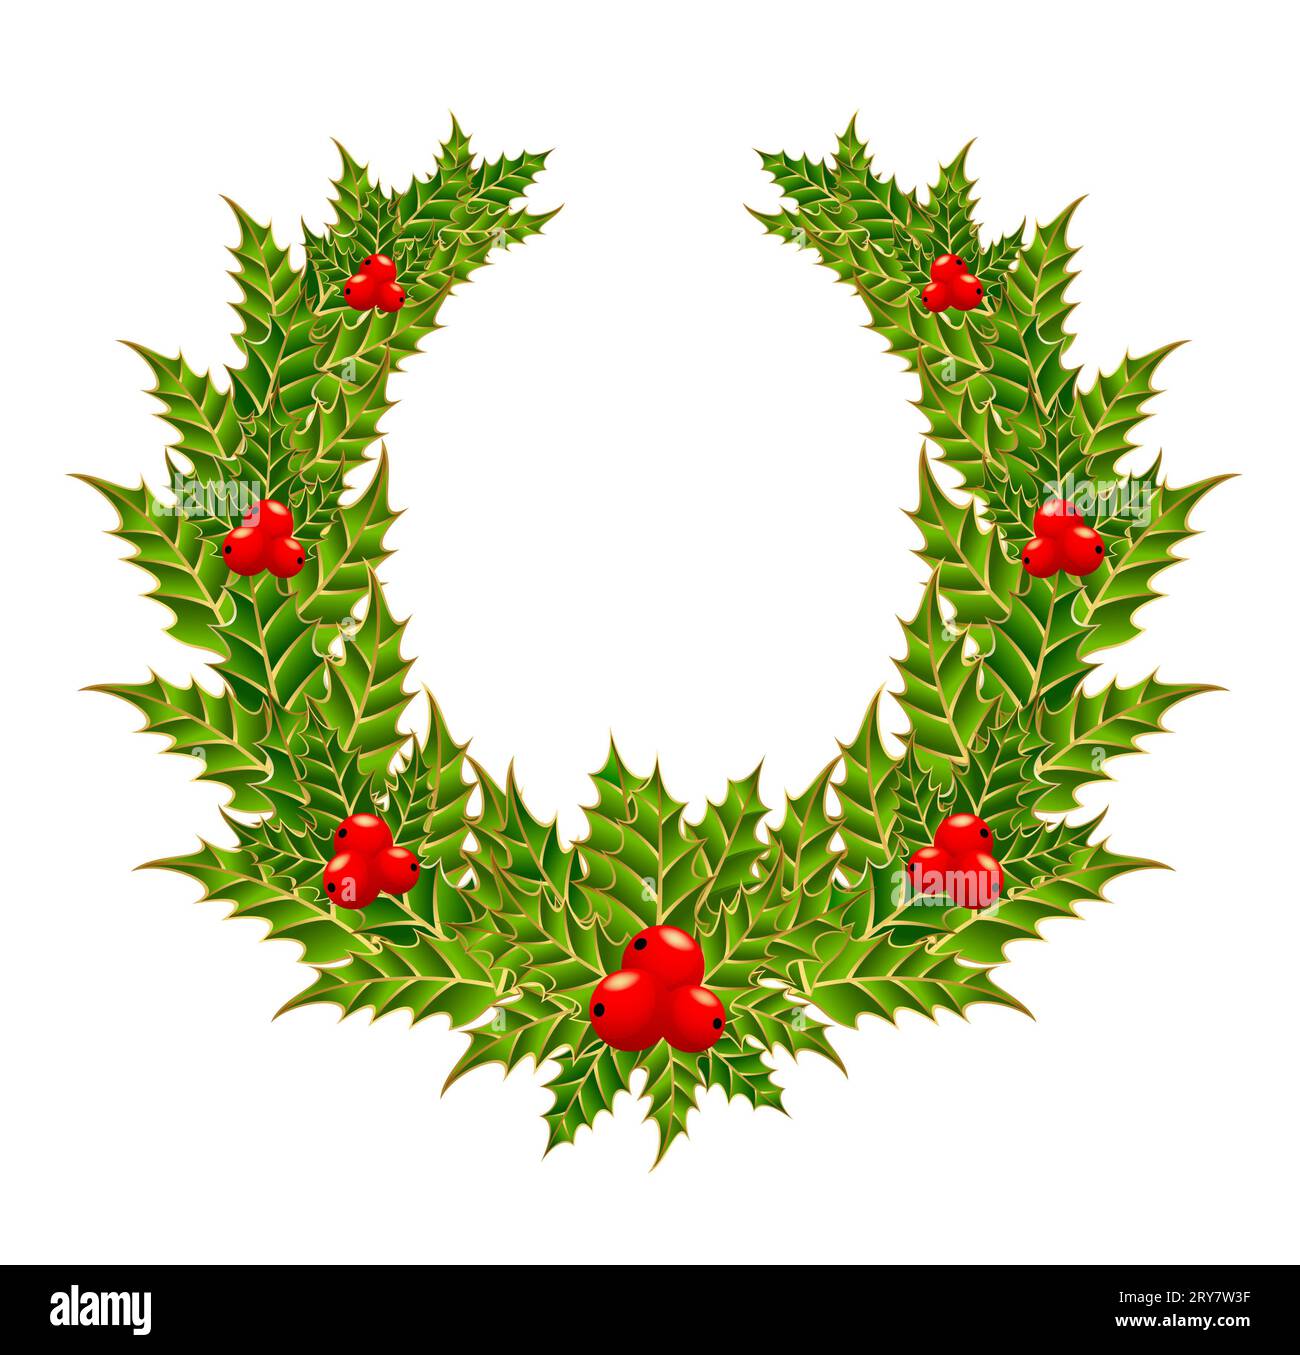 Beautiful christmas wreath with a red berry Stock Photo